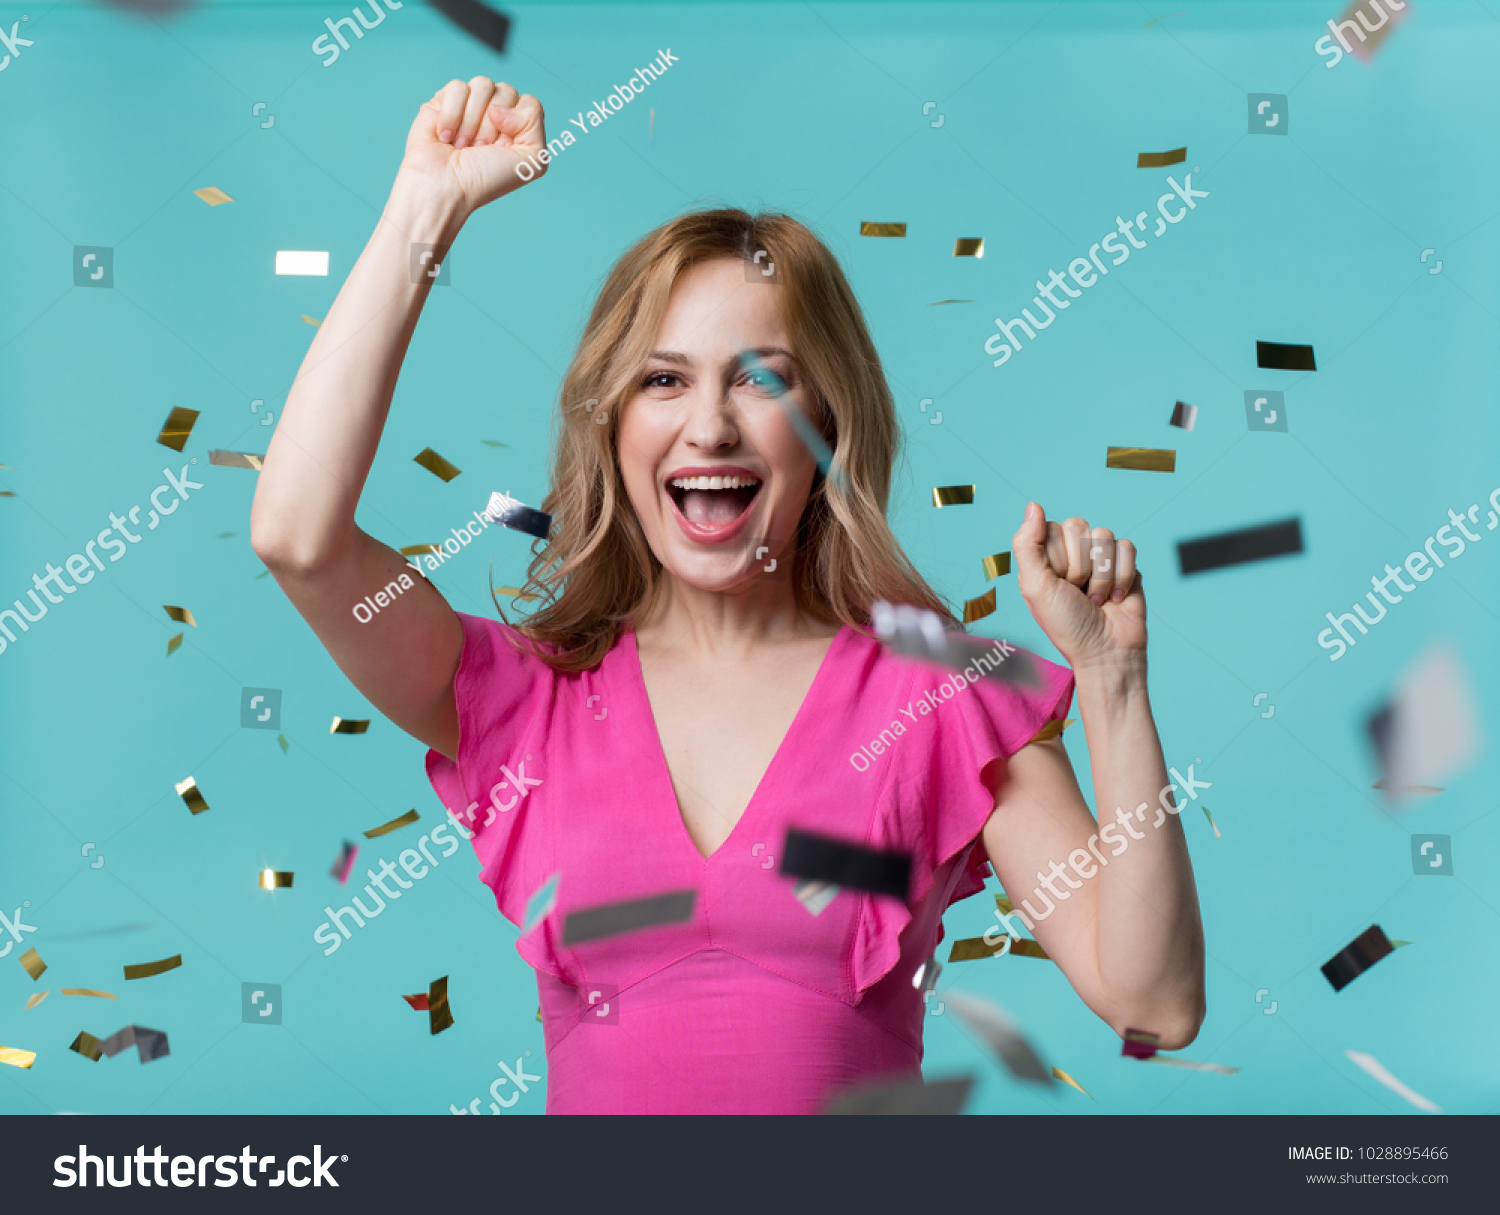 Portrait of contented blonde girl exulting while raising her hands up as gesture of triumph. Confetti flying in air. Isolated on blue background #1028895466